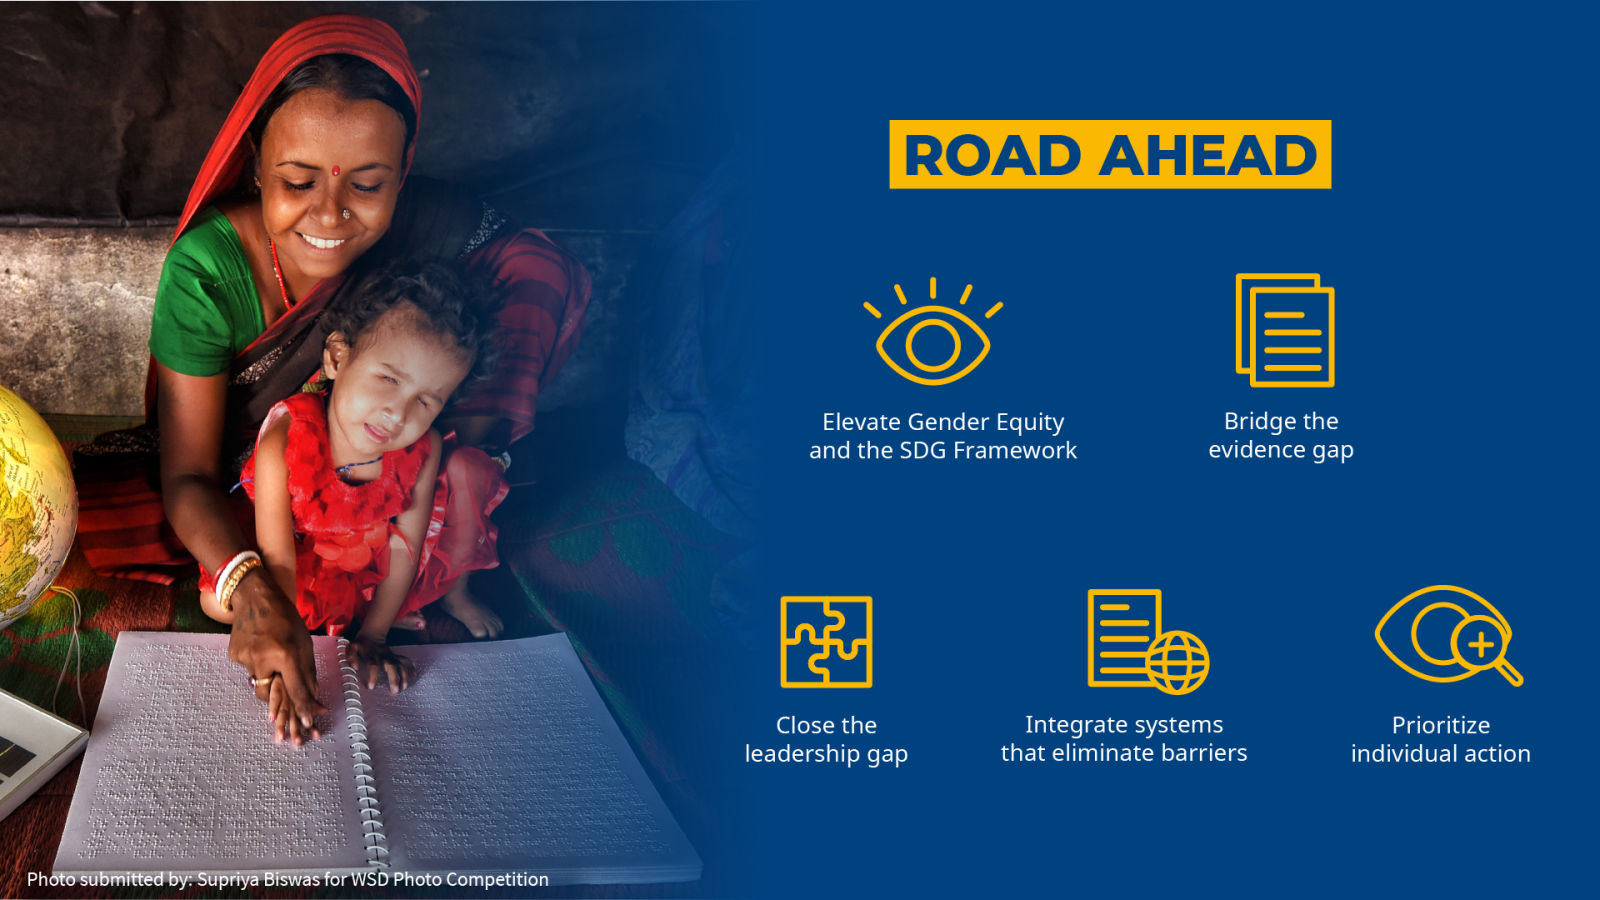 Road Ahead Elevate Gender Equity and the SDG Framework Bridge the evidence gap Close the leadership gap Integrate systems that eliminate barriers Prioritize individual action